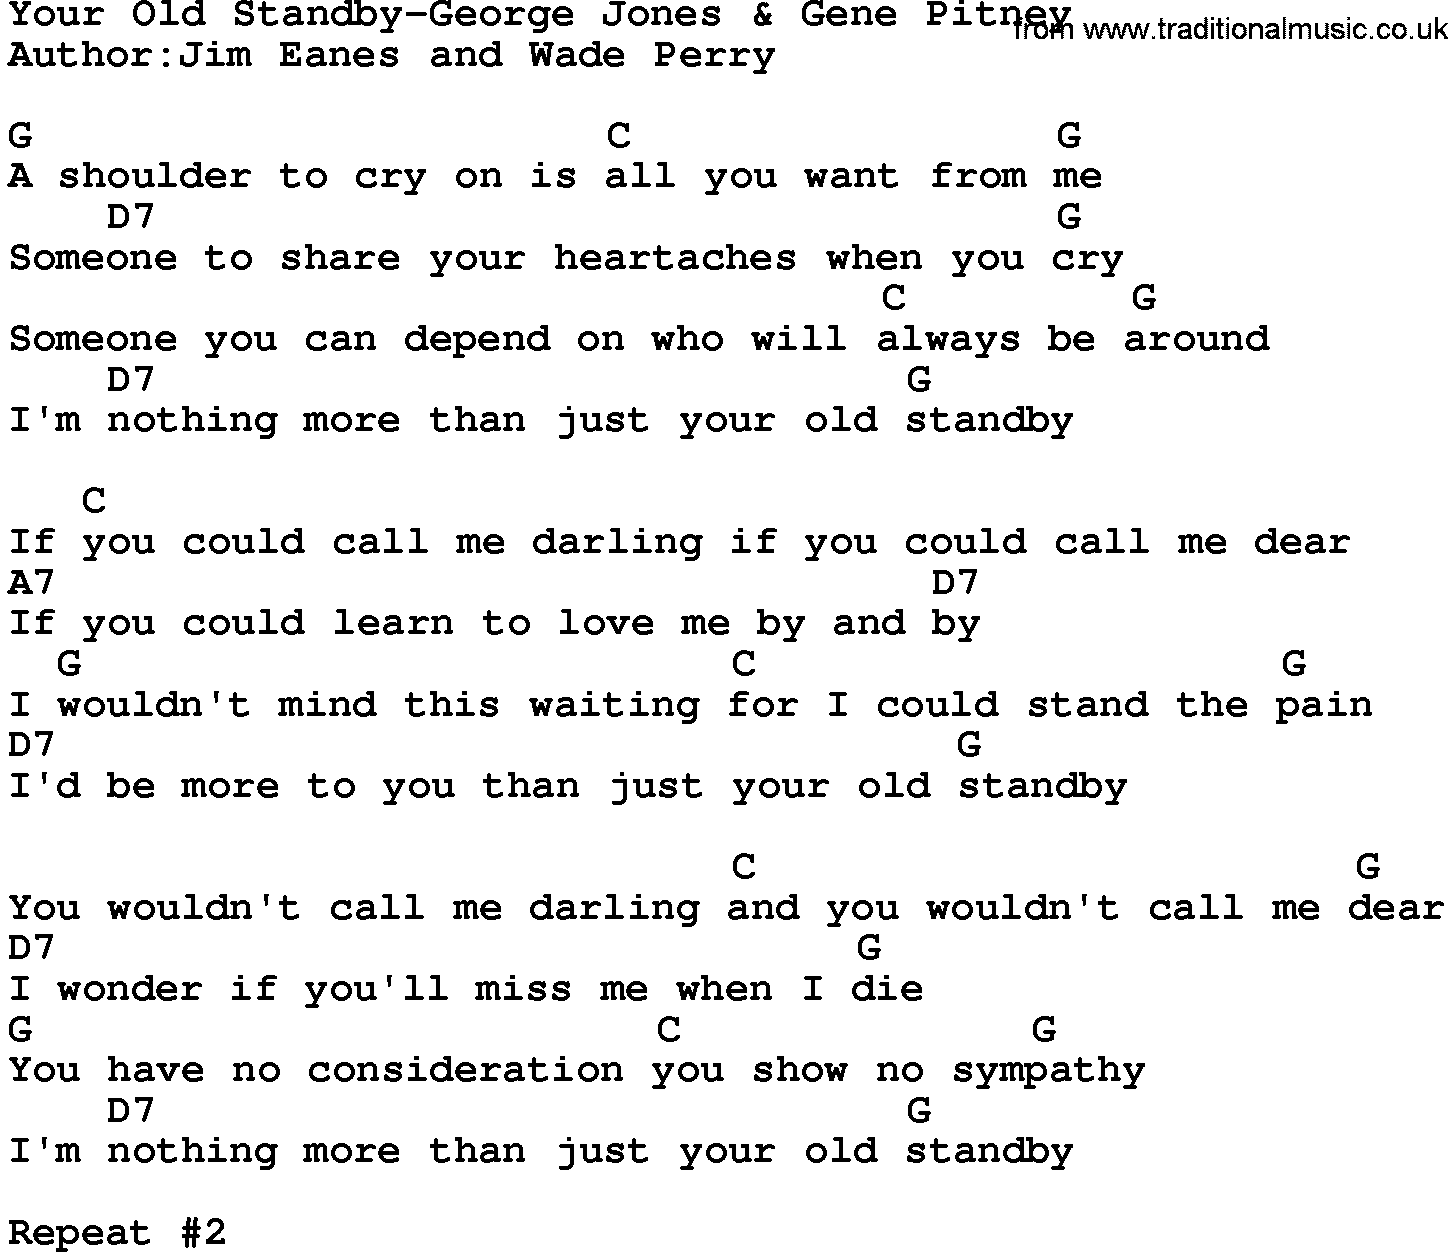 Country music song: Your Old Standby-George Jones & Gene Pitney lyrics and chords